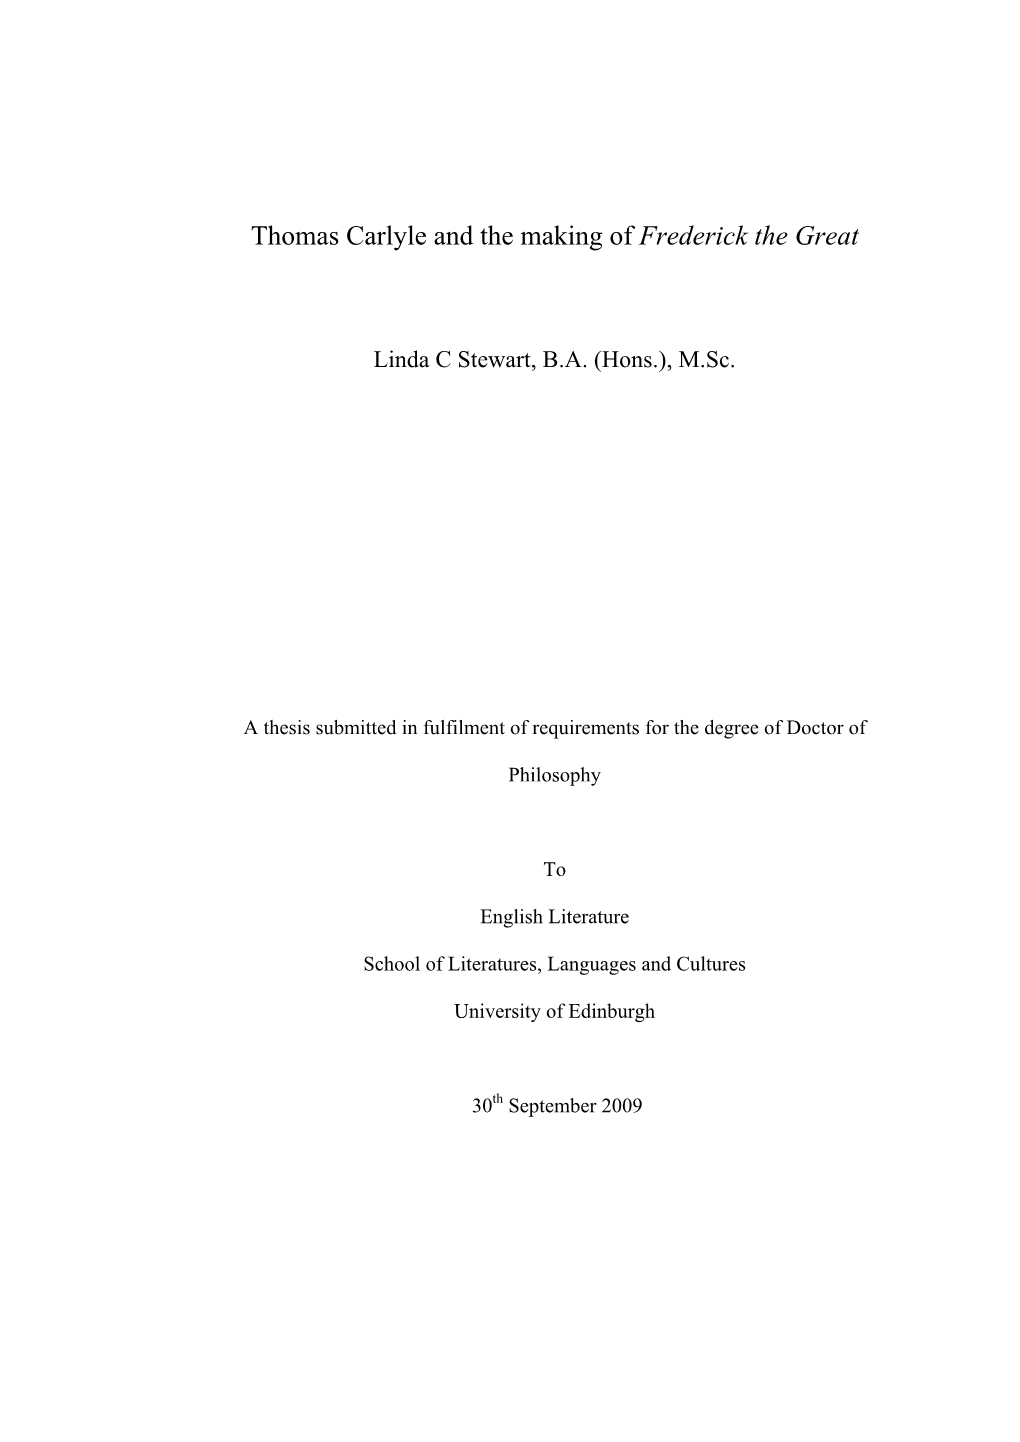 Thomas Carlyle and the Making of Frederick the Great